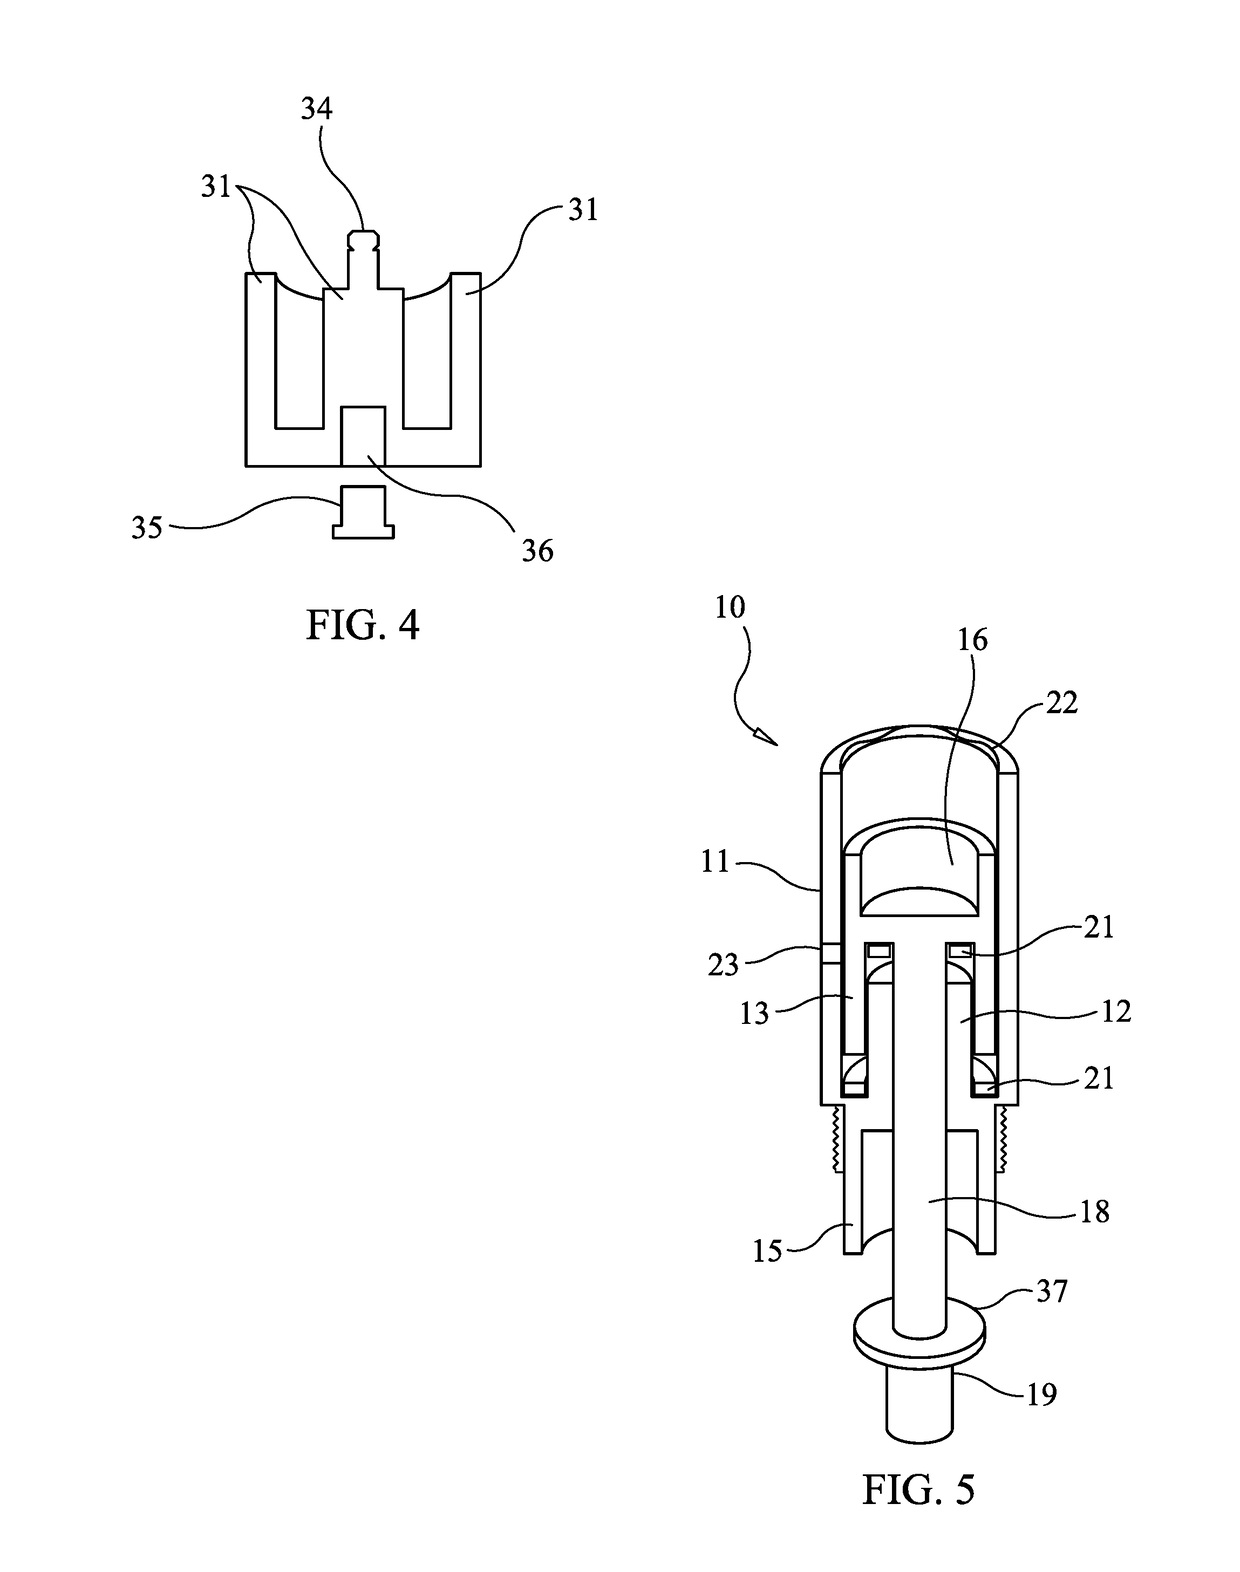 Microneedle cartridge and nosecone assembly